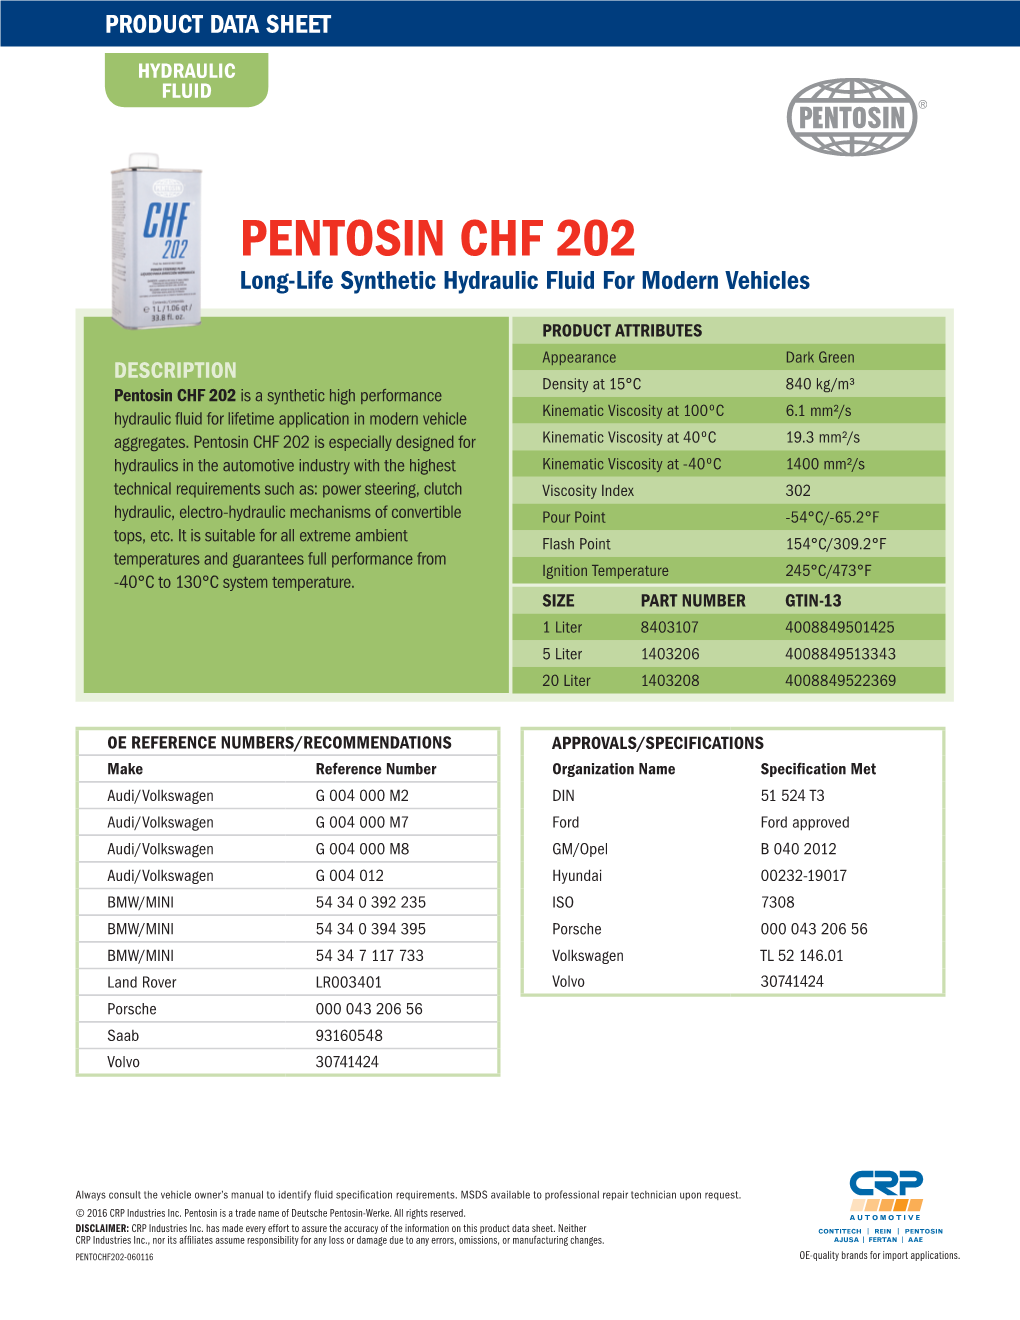 PENTOSIN CHF 202 Long-Life Synthetic Hydraulic Fluid for Modern Vehicles